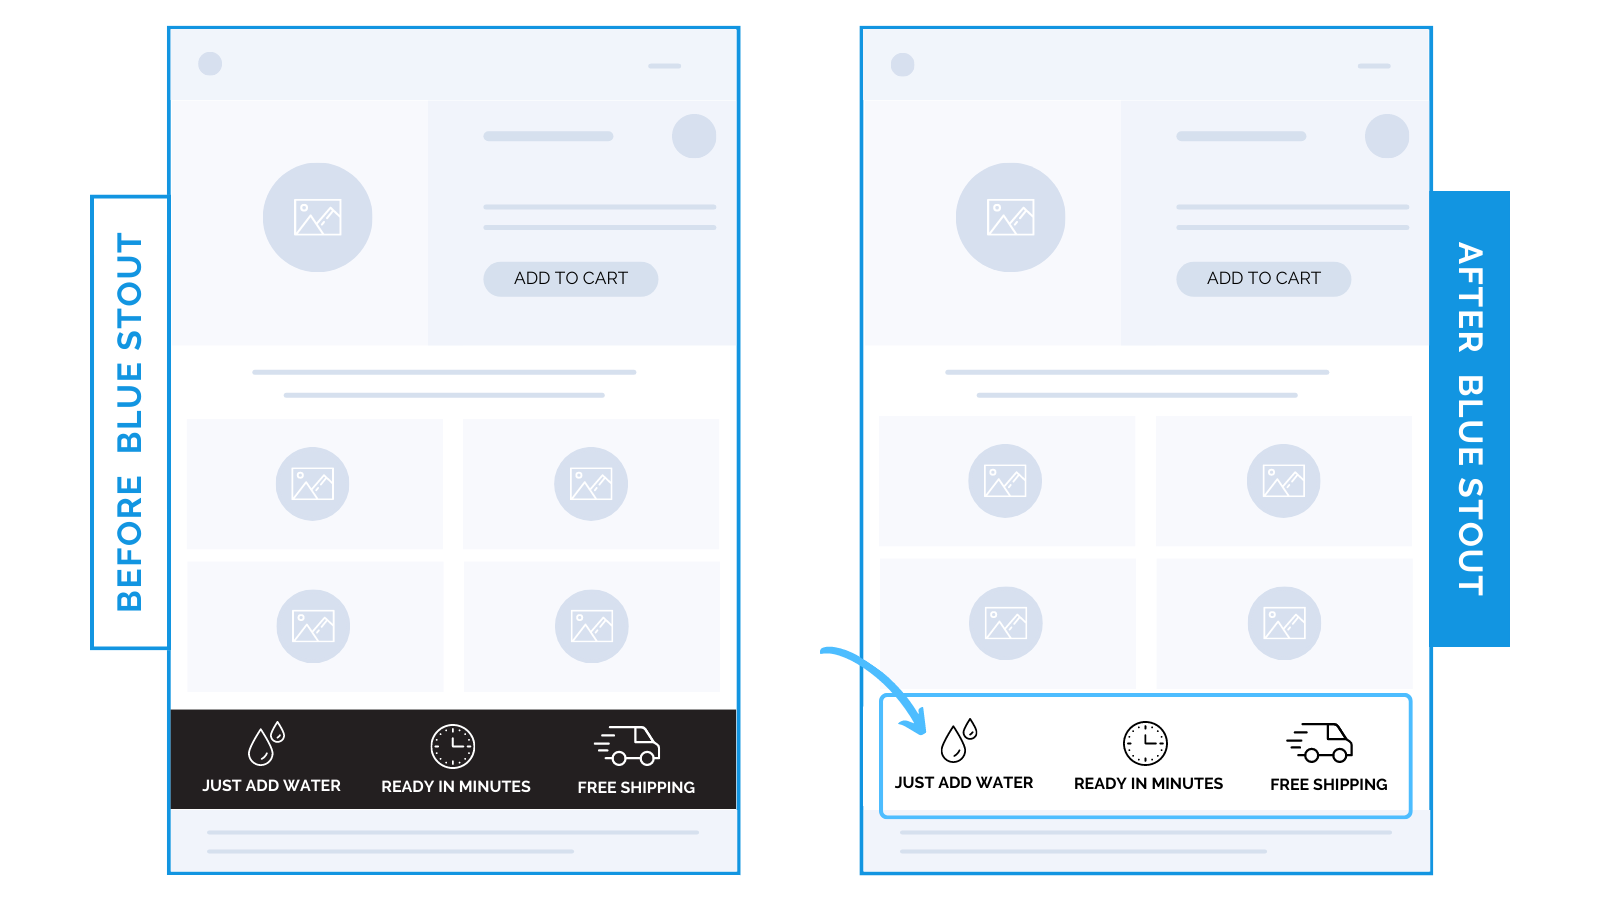 Removing visual barriers on product page